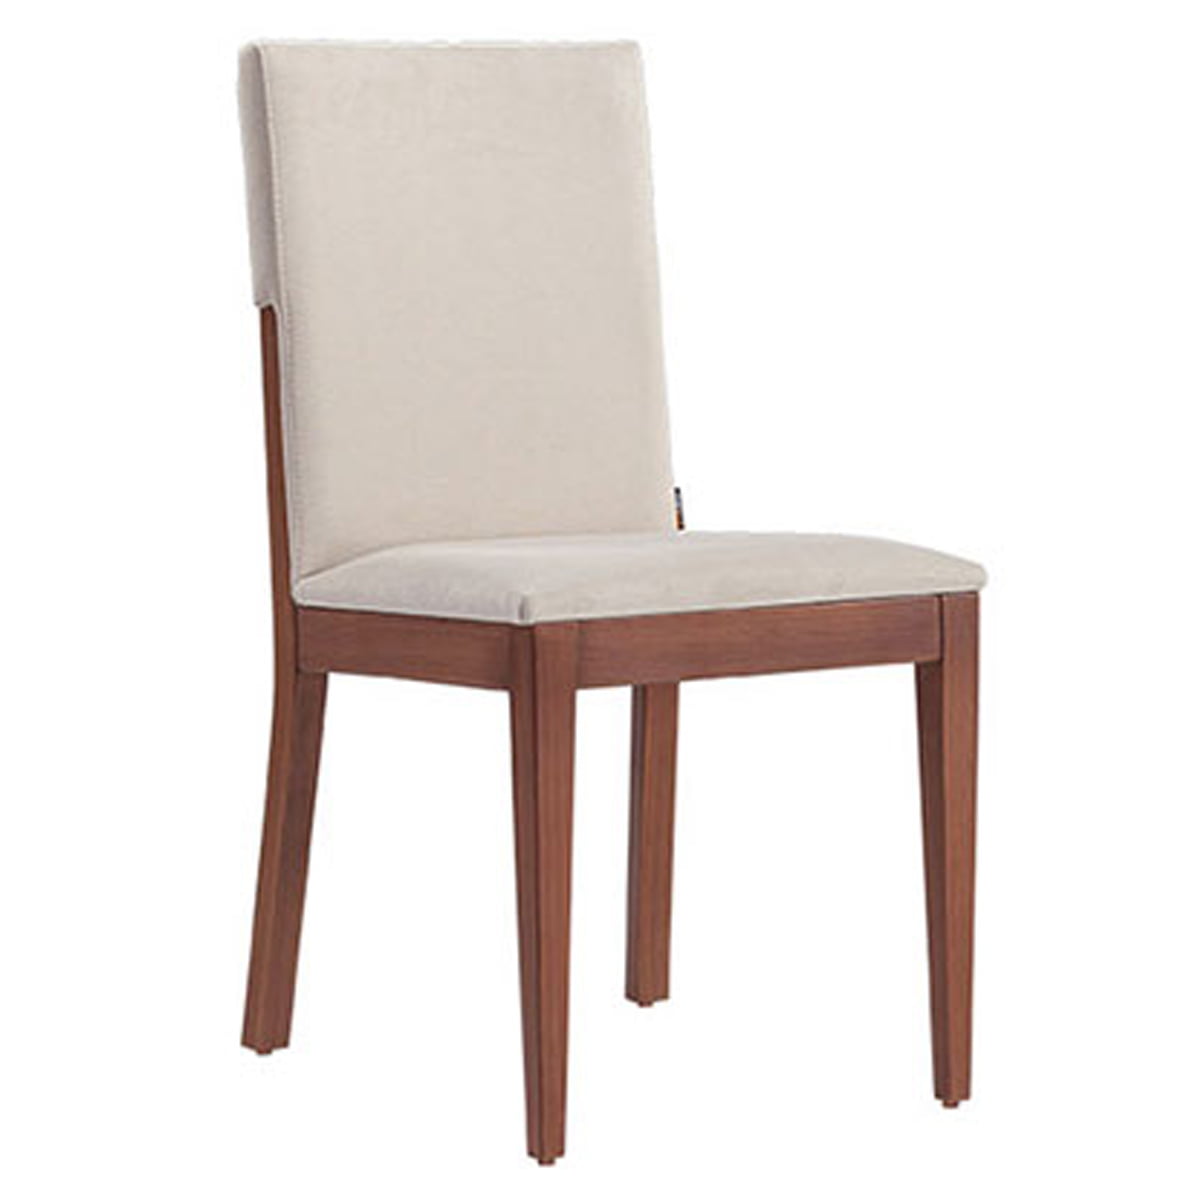 Neo 300139e Modern Upholstered Side Chair Without Arms